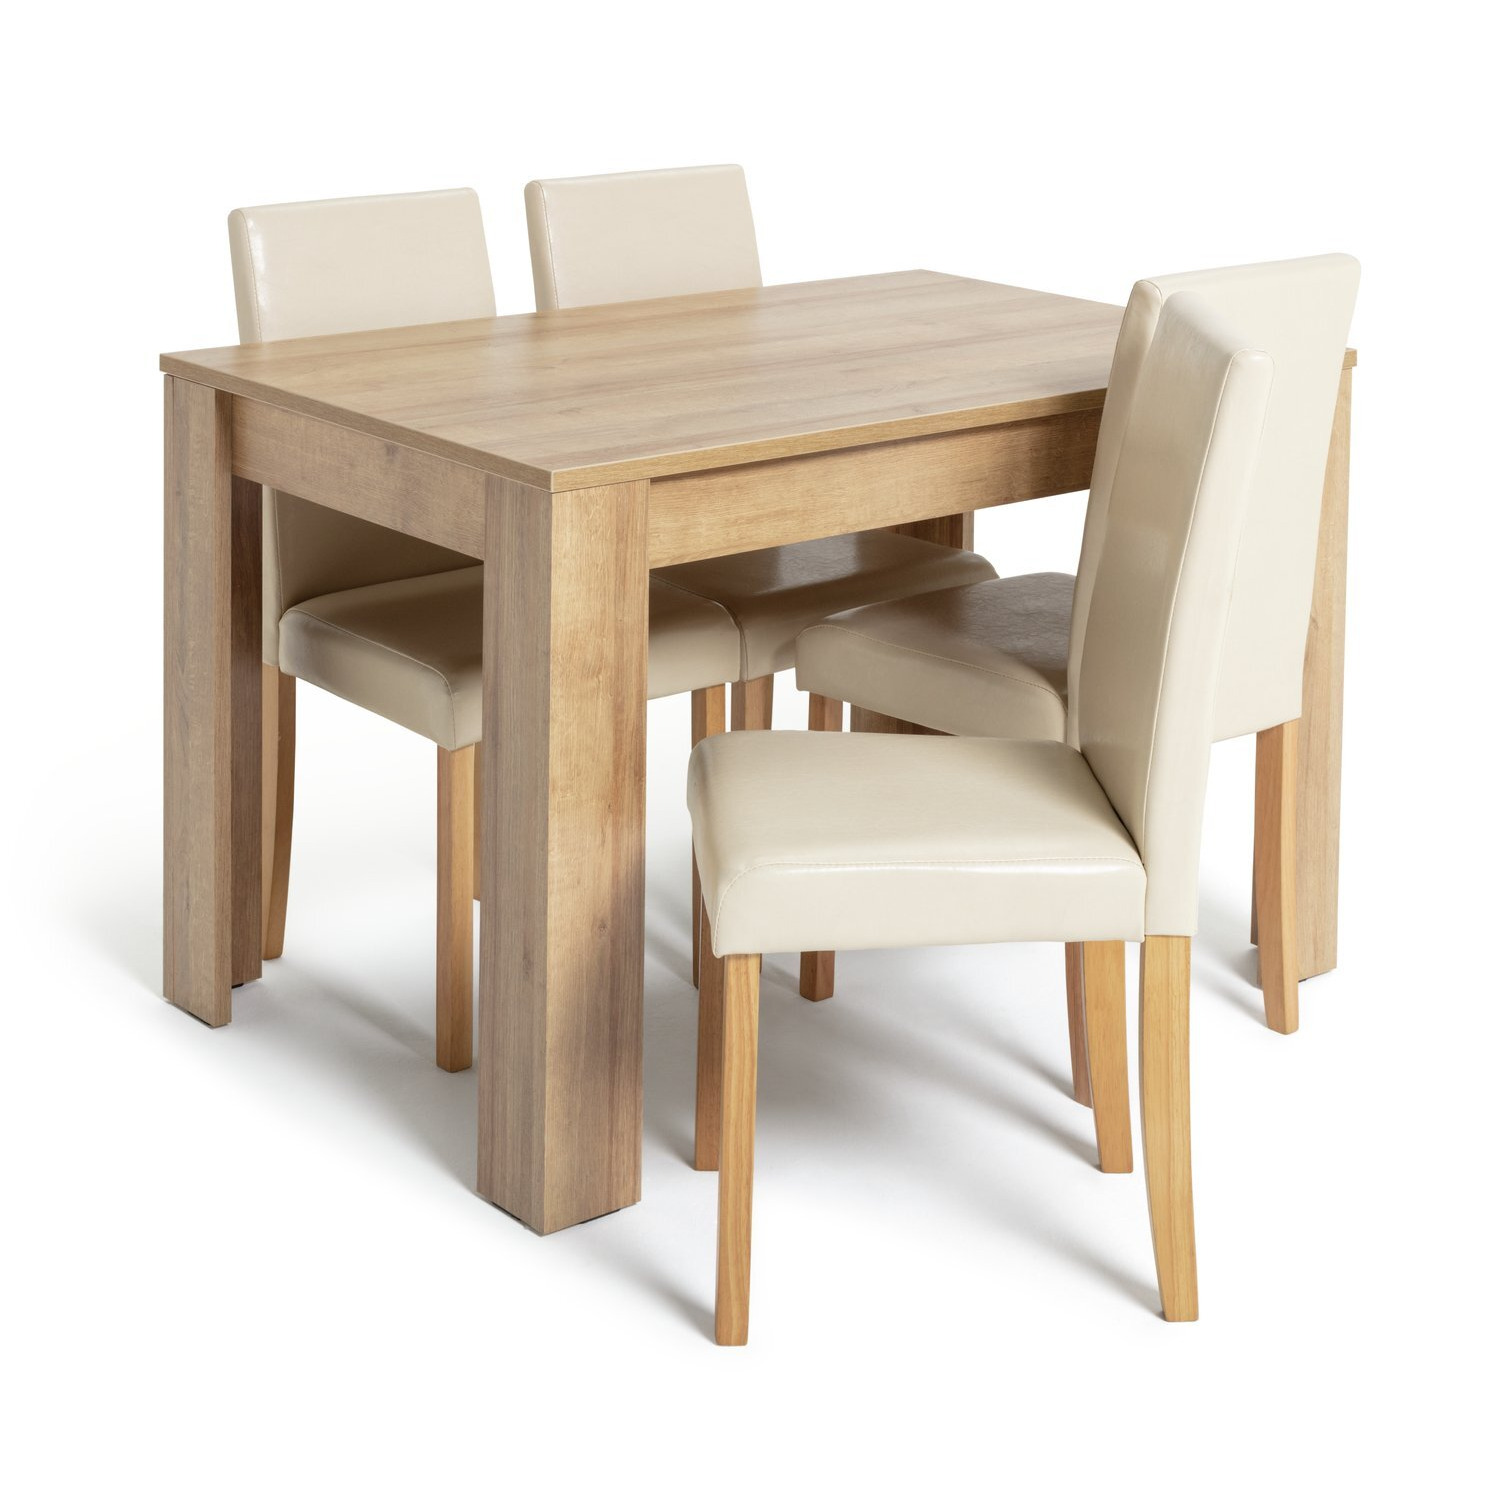 Argos Home Miami Oak Effect Dining Table & 4 Cream Chairs - image 1